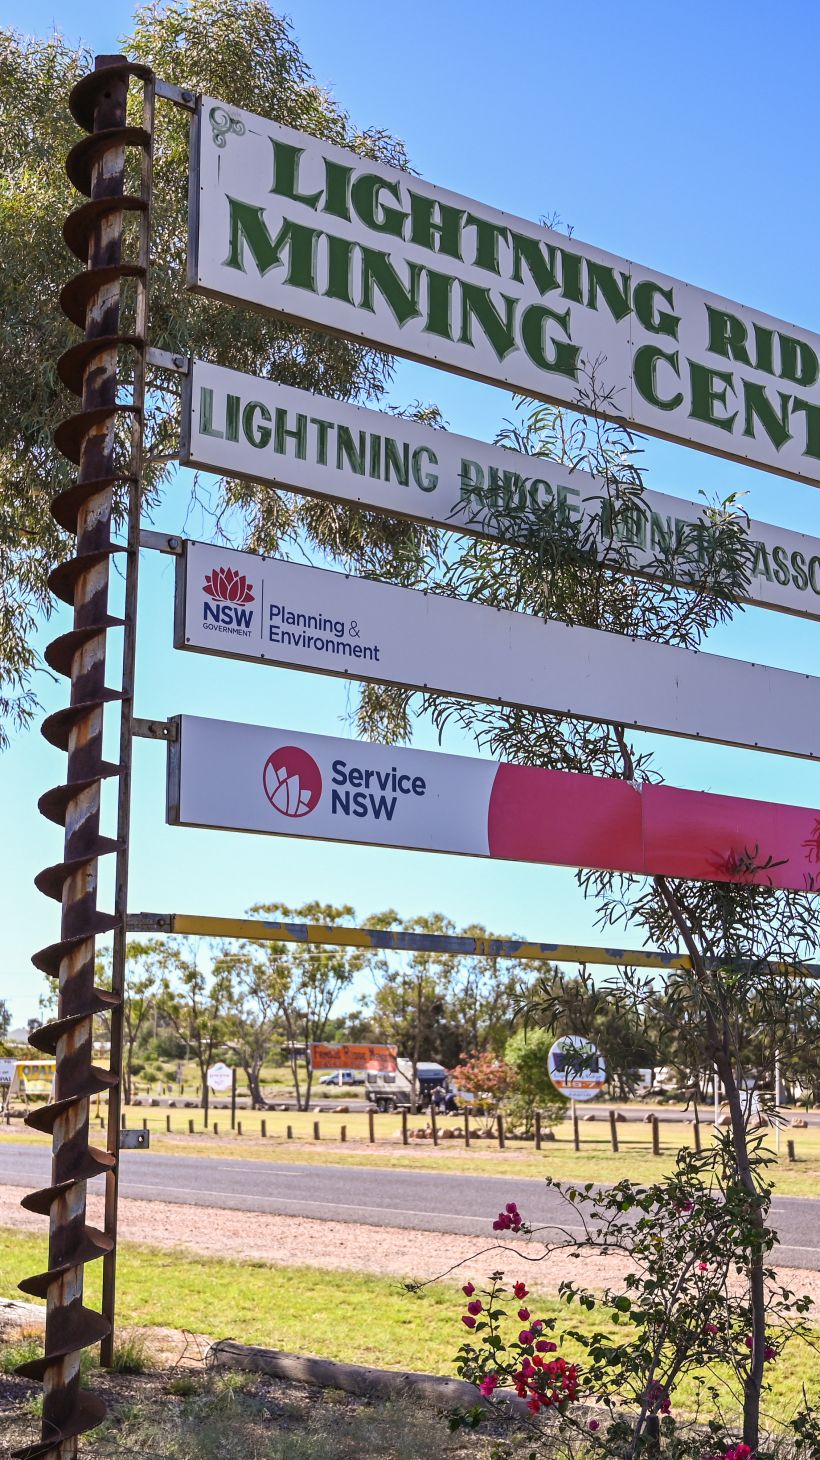 A photo of the "Welcome to Lightning Ridge" road sign.